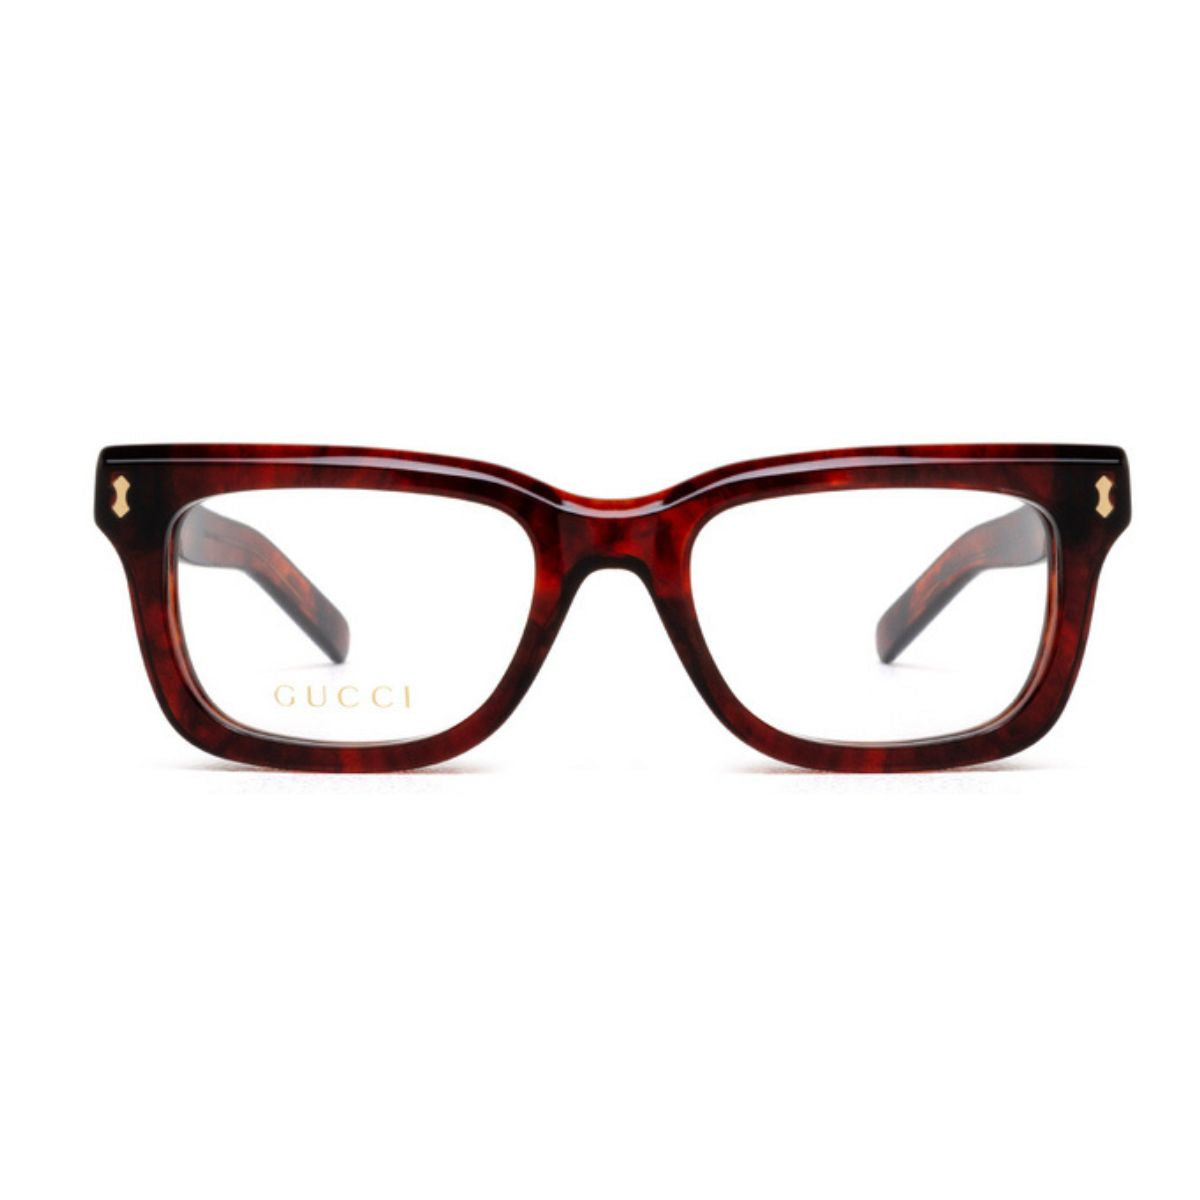 "Gucci GG1522O 007 optical frame for women's online at optorium"